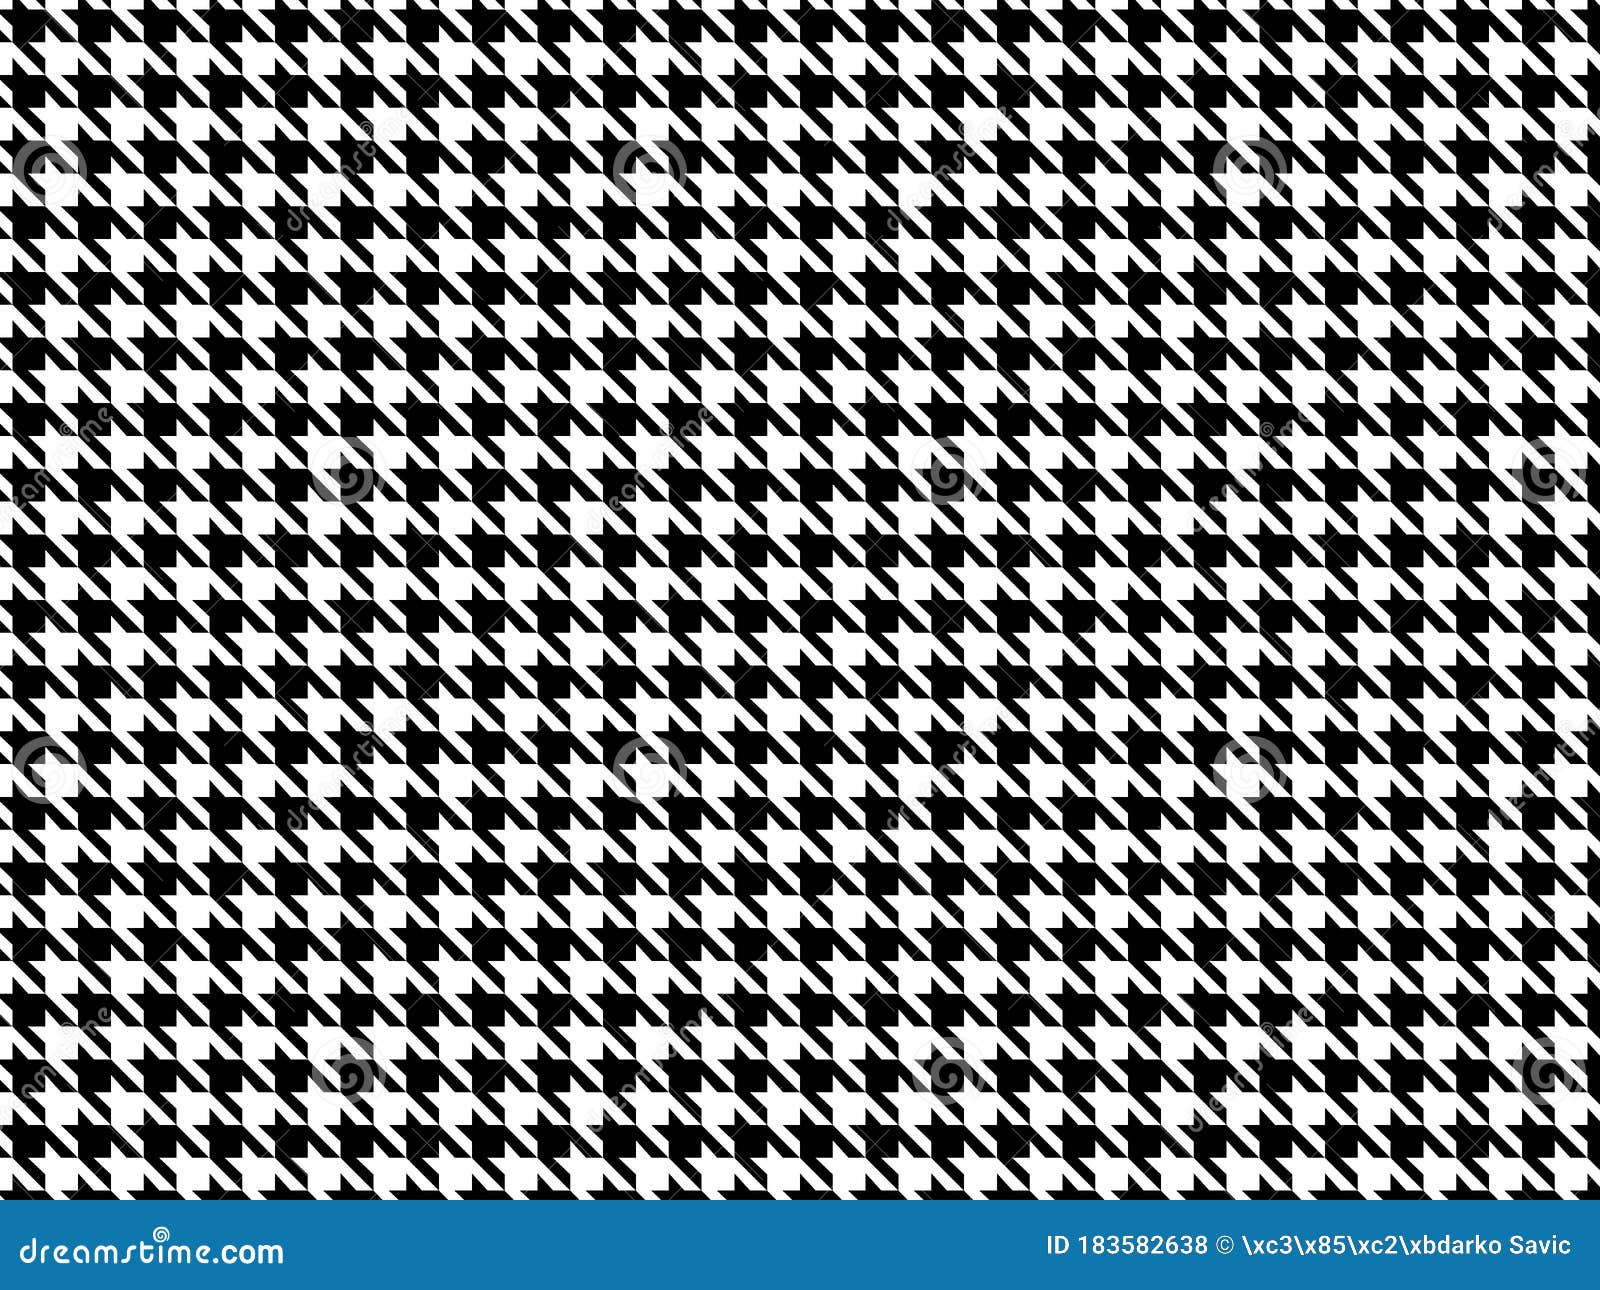 Houndstooth Black And White Fabric Seamless Pattern Vector Stock Vector Illustration Of Check Simple 183582638